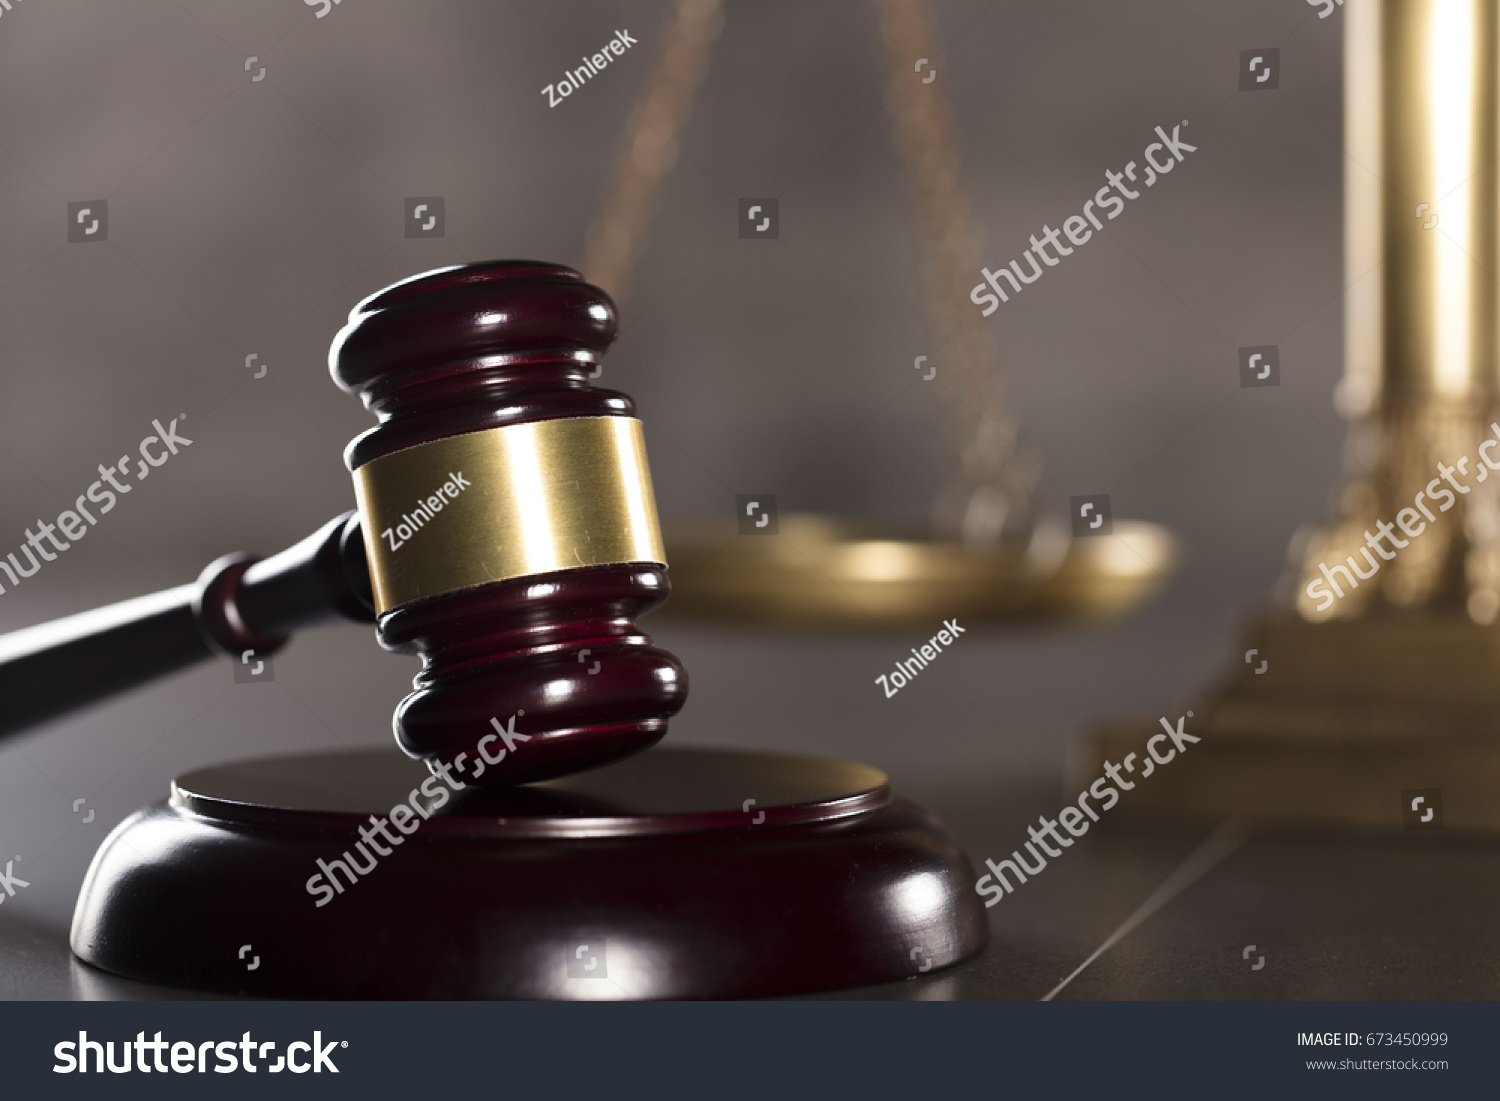 Gavel. Law concept. Gray background. #673450999